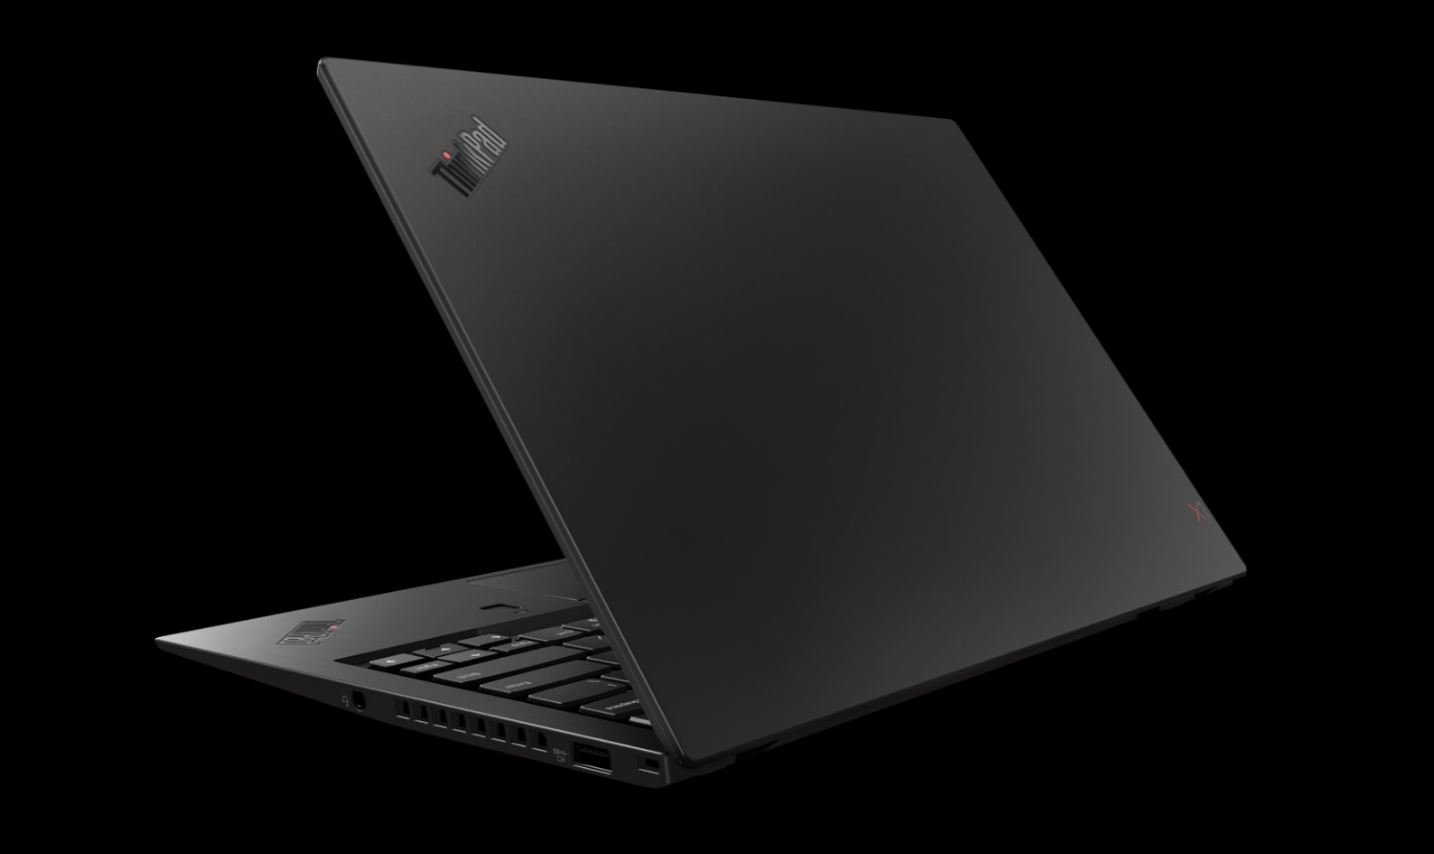 Lenovo unveils next gen ThinkPad X1 Carbon with Dolby Vision HDR Display and 8th gen Intel